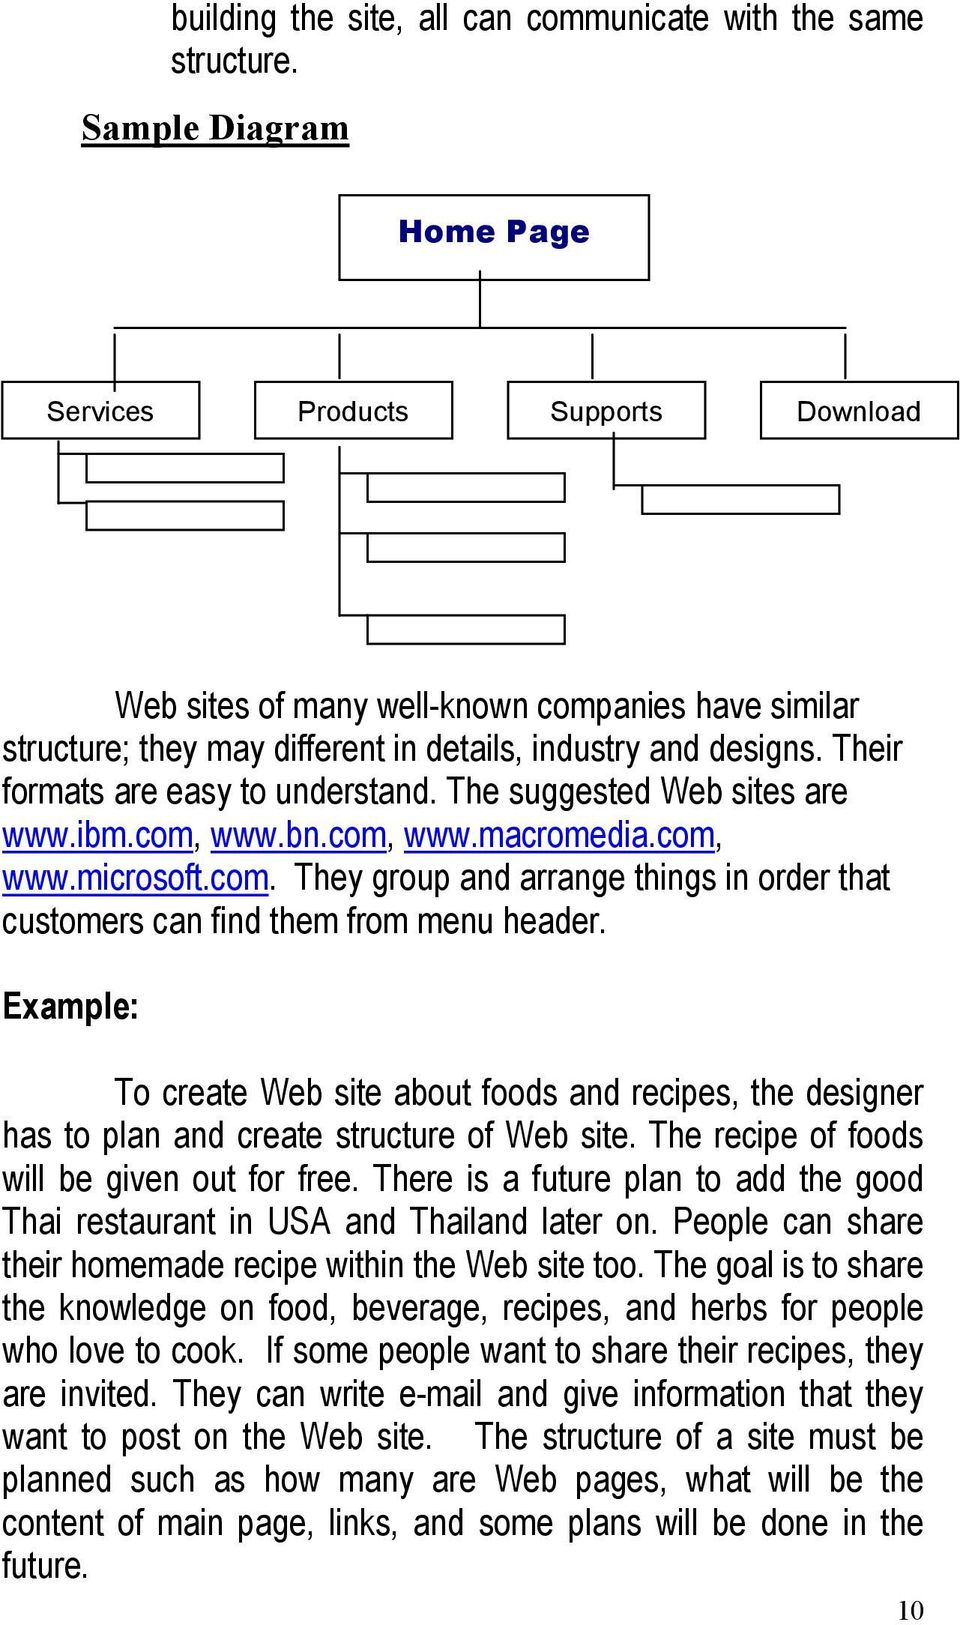 Their formats are easy to understand. The suggested Web sites are www.ibm.com, www.bn.com, www.macromedia.com, www.microsoft.com. They group and arrange things in order that customers can find them from menu header.